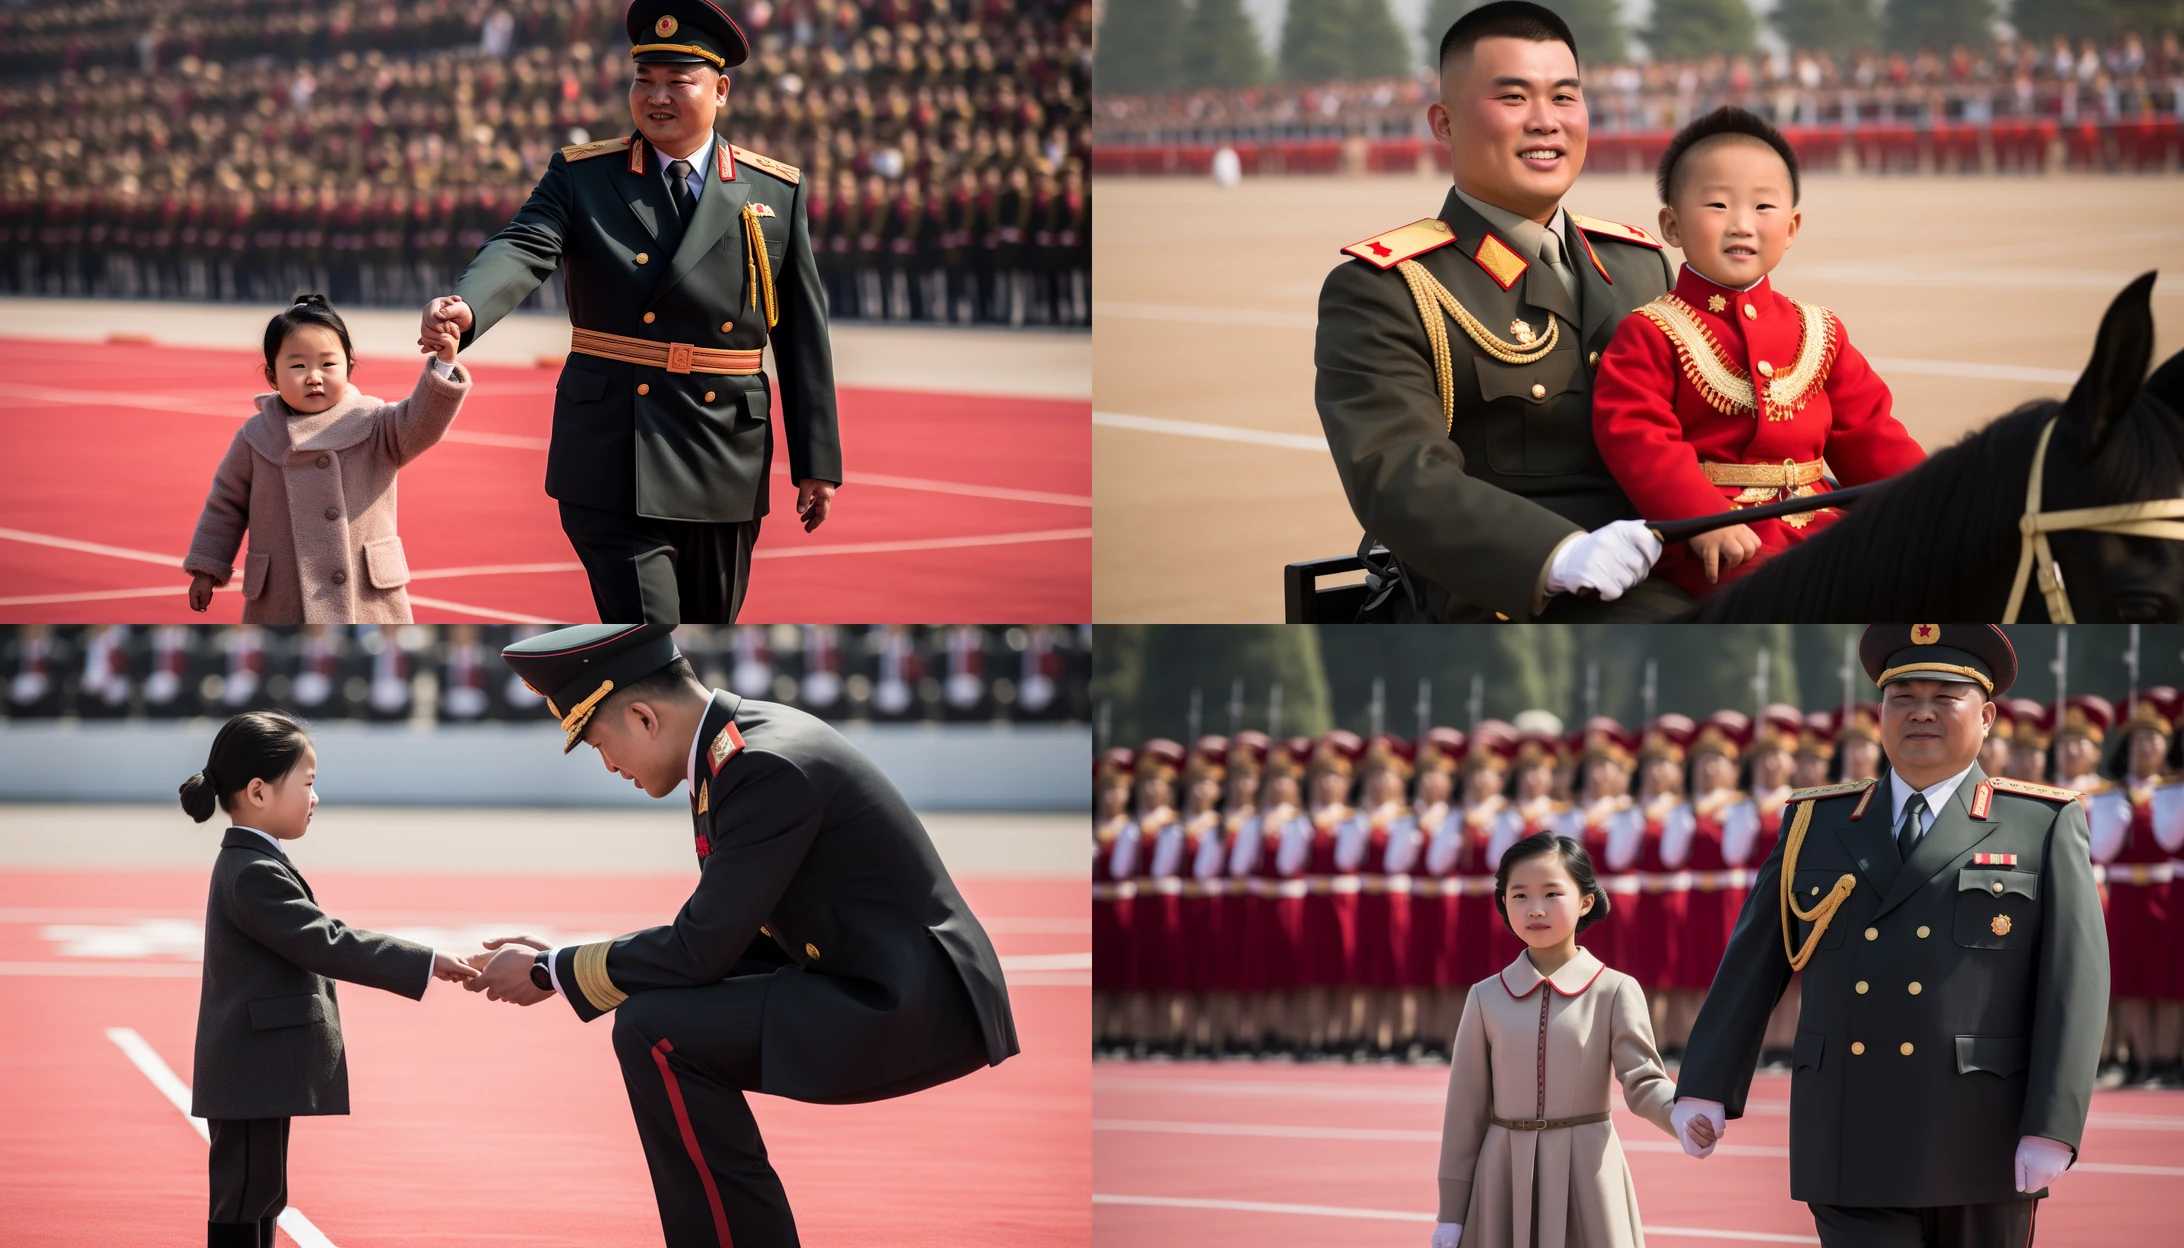 Kim Jong Un with his daughter attending a paramilitary parade ceremony in Pyongyang. Photo taken with Sony Alpha a7 III.